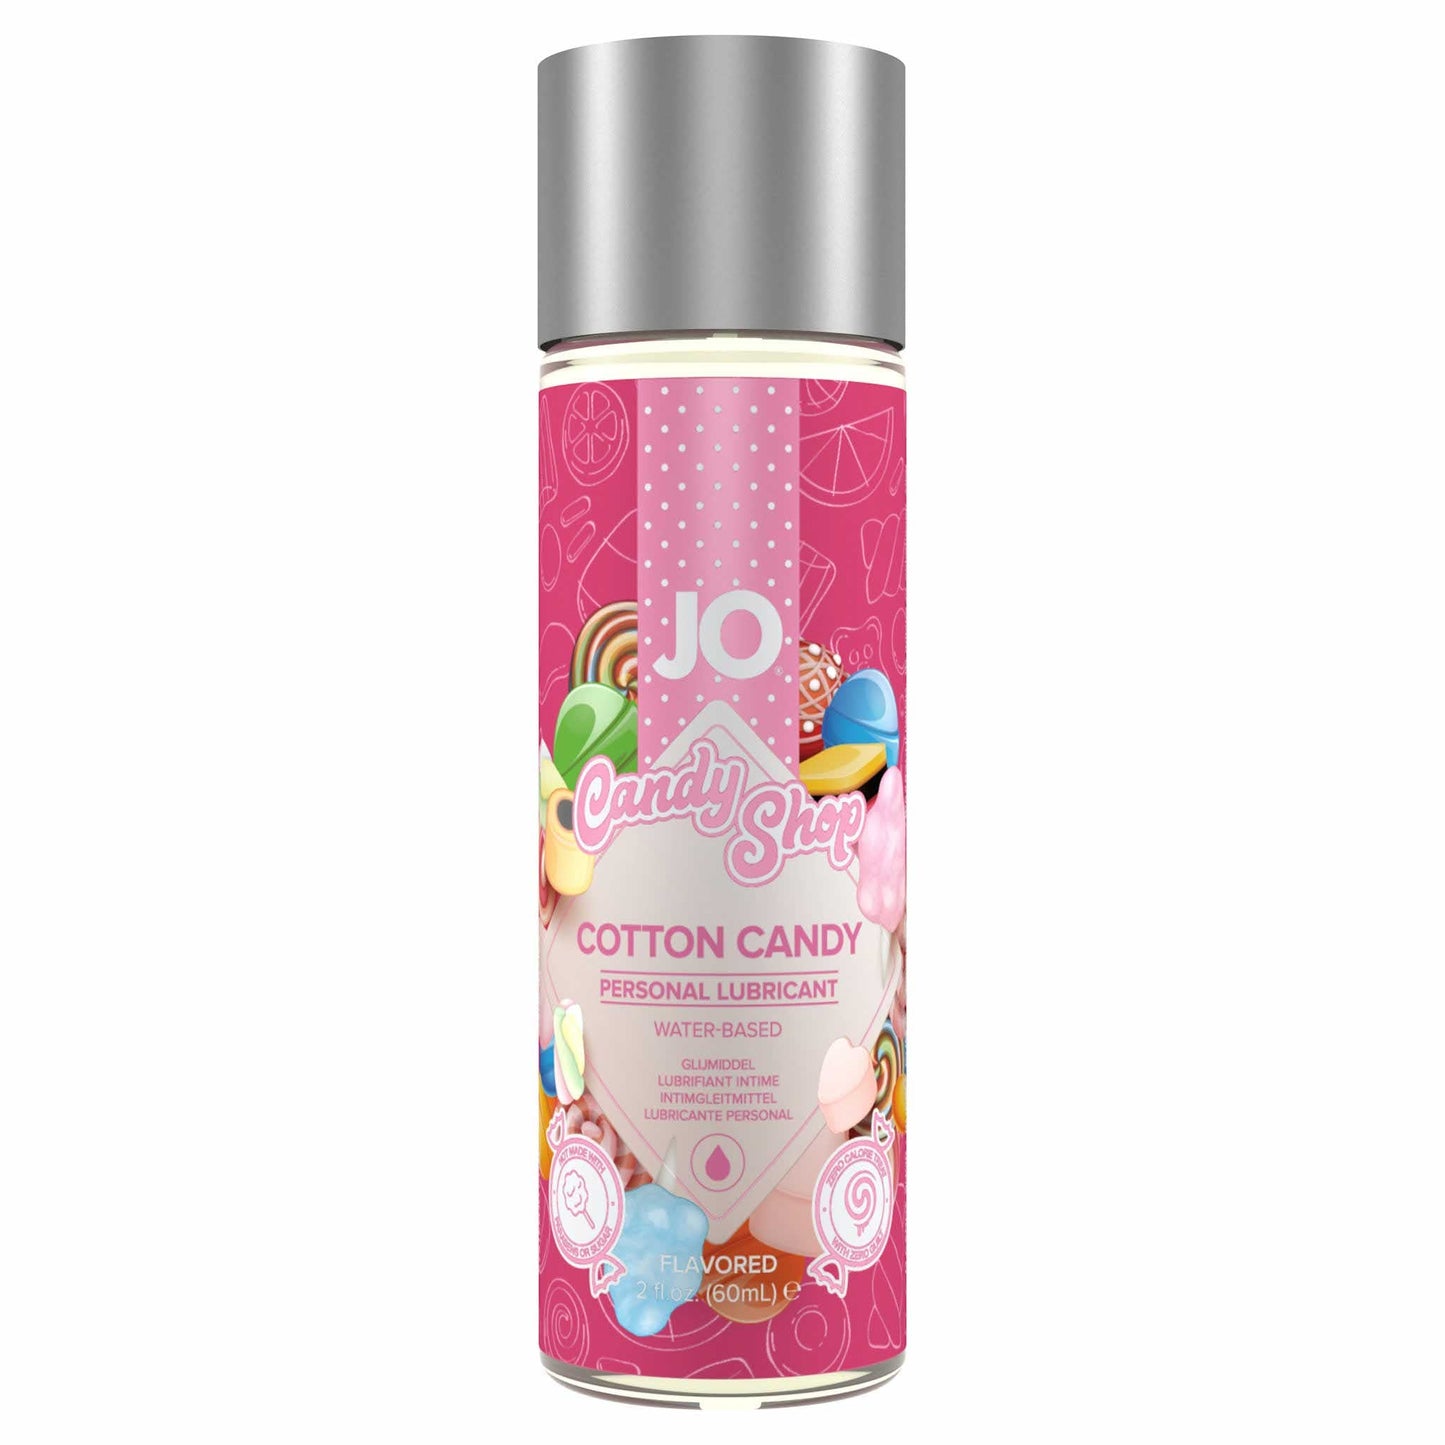 front view of the jo h2o candy shop water-based flavored personal lubricant 2 fl. oz. 4g0631 cotton